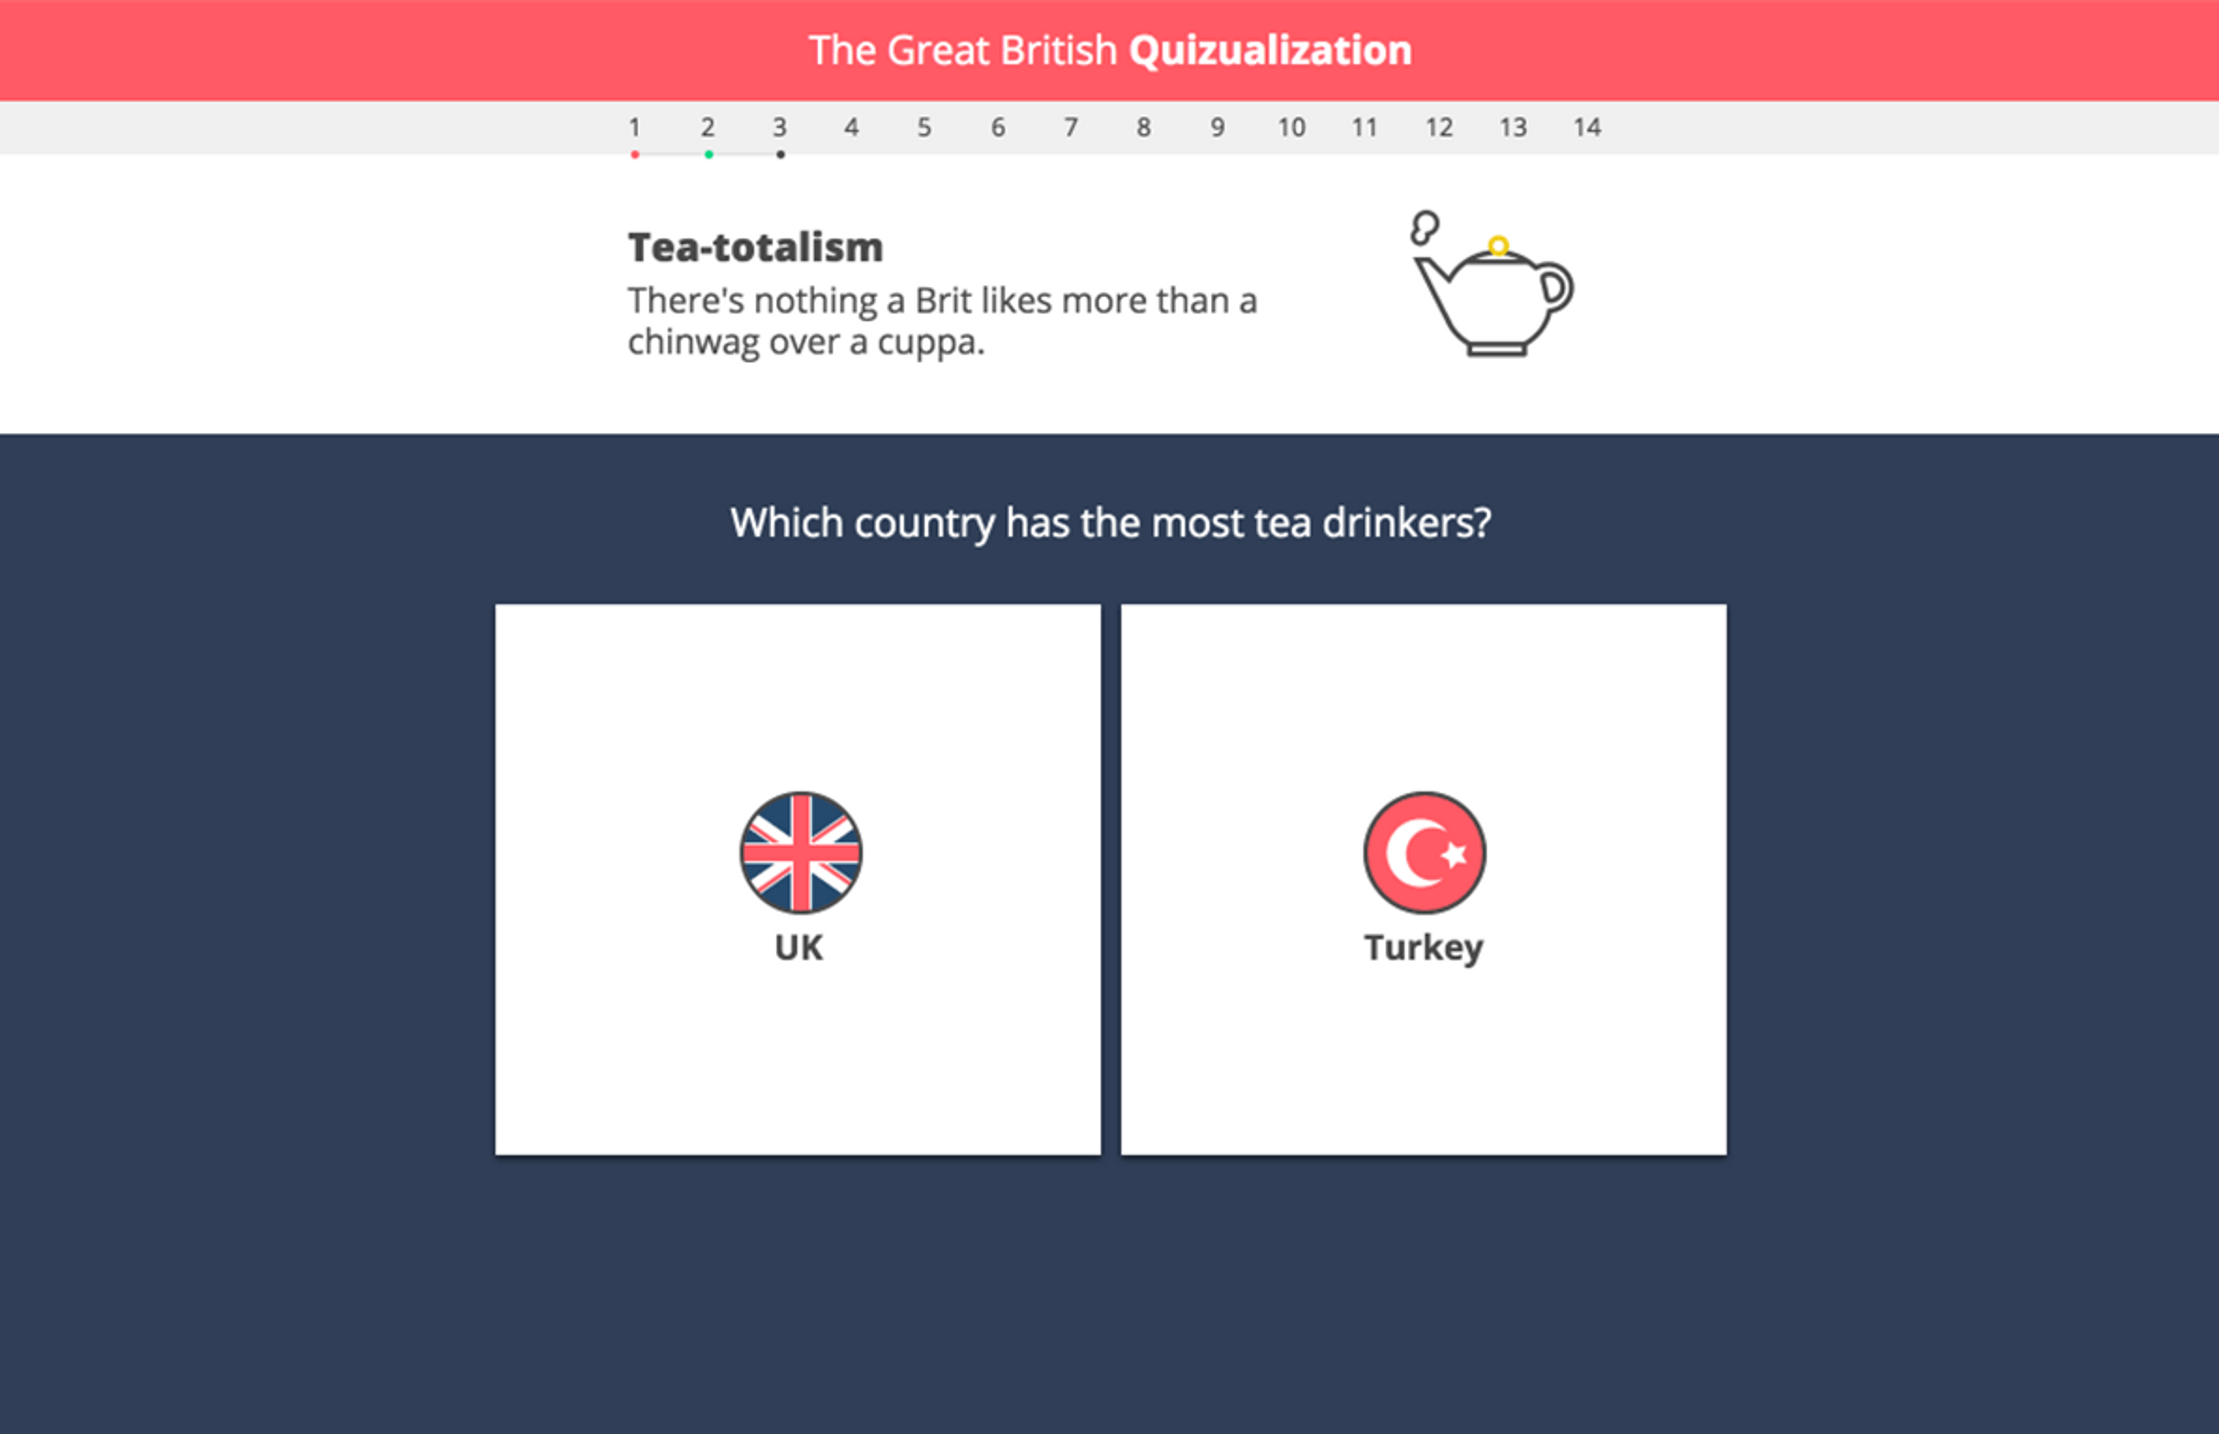 A screenshot from a question in the Great British Quizualization. It reads 'Which country has the most tea drinkers?' The two choices are the UK and Turkey.